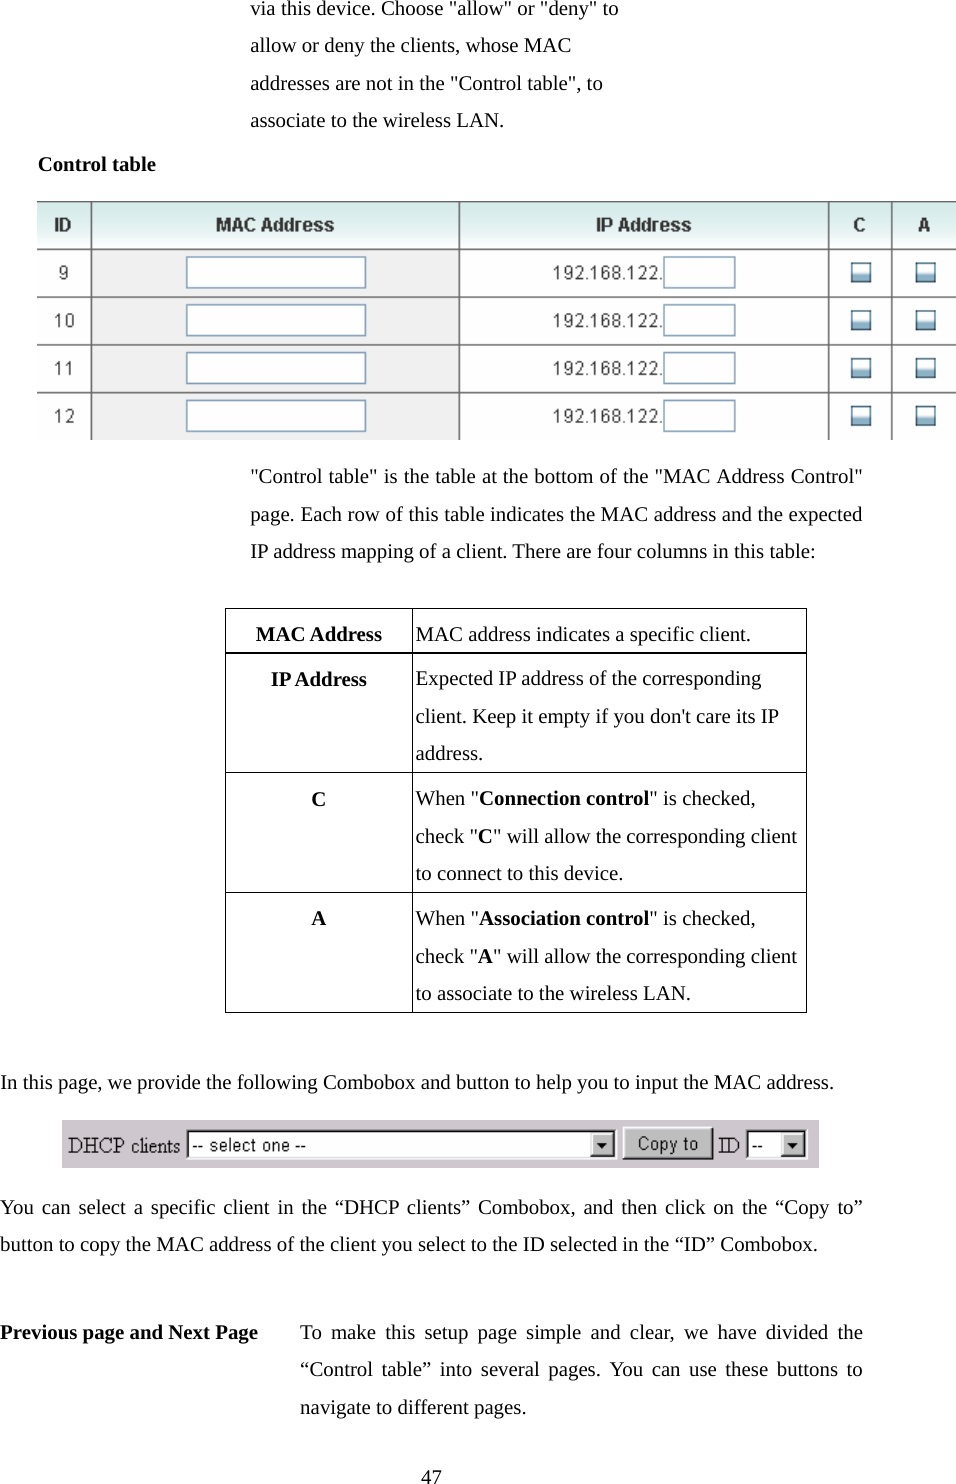  47via this device. Choose &quot;allow&quot; or &quot;deny&quot; to allow or deny the clients, whose MAC addresses are not in the &quot;Control table&quot;, to associate to the wireless LAN. Control table  &quot;Control table&quot; is the table at the bottom of the &quot;MAC Address Control&quot; page. Each row of this table indicates the MAC address and the expected IP address mapping of a client. There are four columns in this table:  MAC Address  MAC address indicates a specific client. IP Address  Expected IP address of the corresponding client. Keep it empty if you don&apos;t care its IP address. C  When &quot;Connection control&quot; is checked, check &quot;C&quot; will allow the corresponding client to connect to this device. A  When &quot;Association control&quot; is checked, check &quot;A&quot; will allow the corresponding client to associate to the wireless LAN.  In this page, we provide the following Combobox and button to help you to input the MAC address.  You can select a specific client in the “DHCP clients” Combobox, and then click on the “Copy to” button to copy the MAC address of the client you select to the ID selected in the “ID” Combobox.  Previous page and Next Page  To make this setup page simple and clear, we have divided the “Control table” into several pages. You can use these buttons to navigate to different pages. 